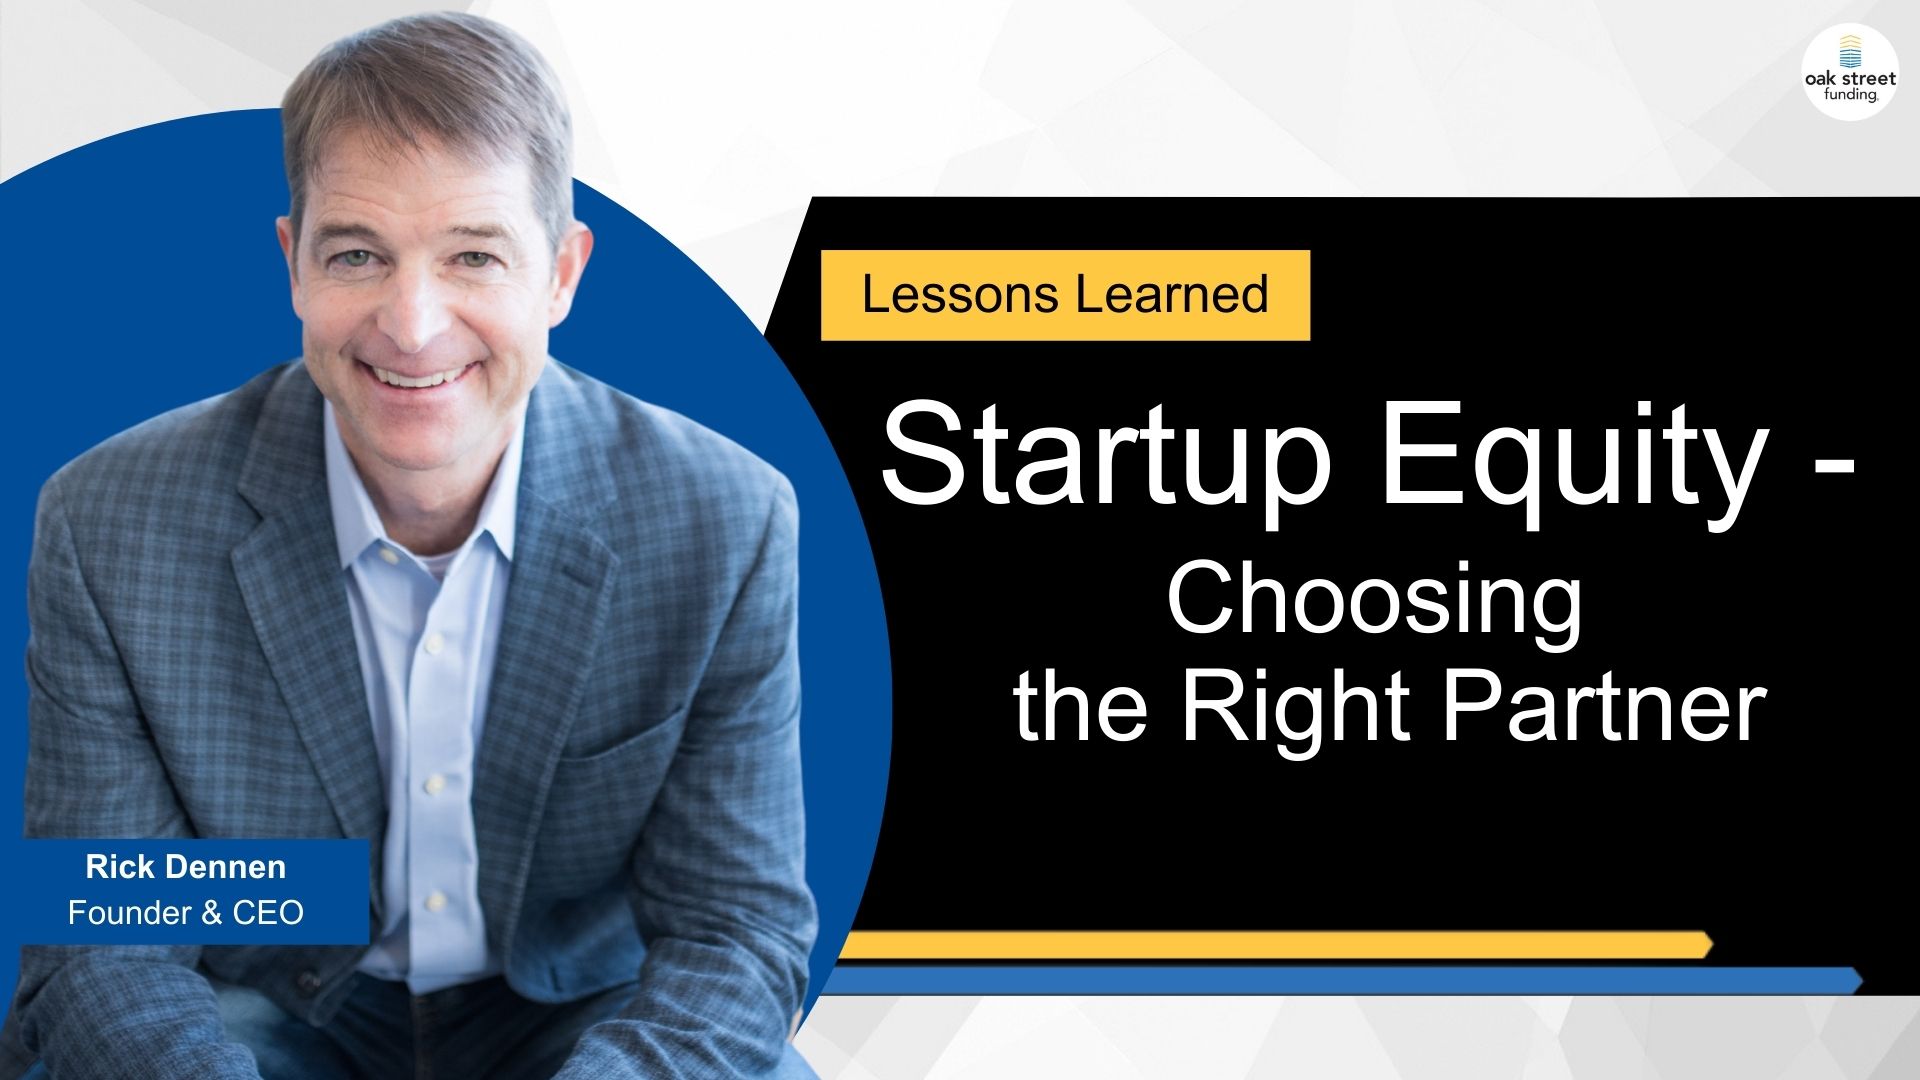 Lessons Learned: Startup Equity - Choosing the Right Partner